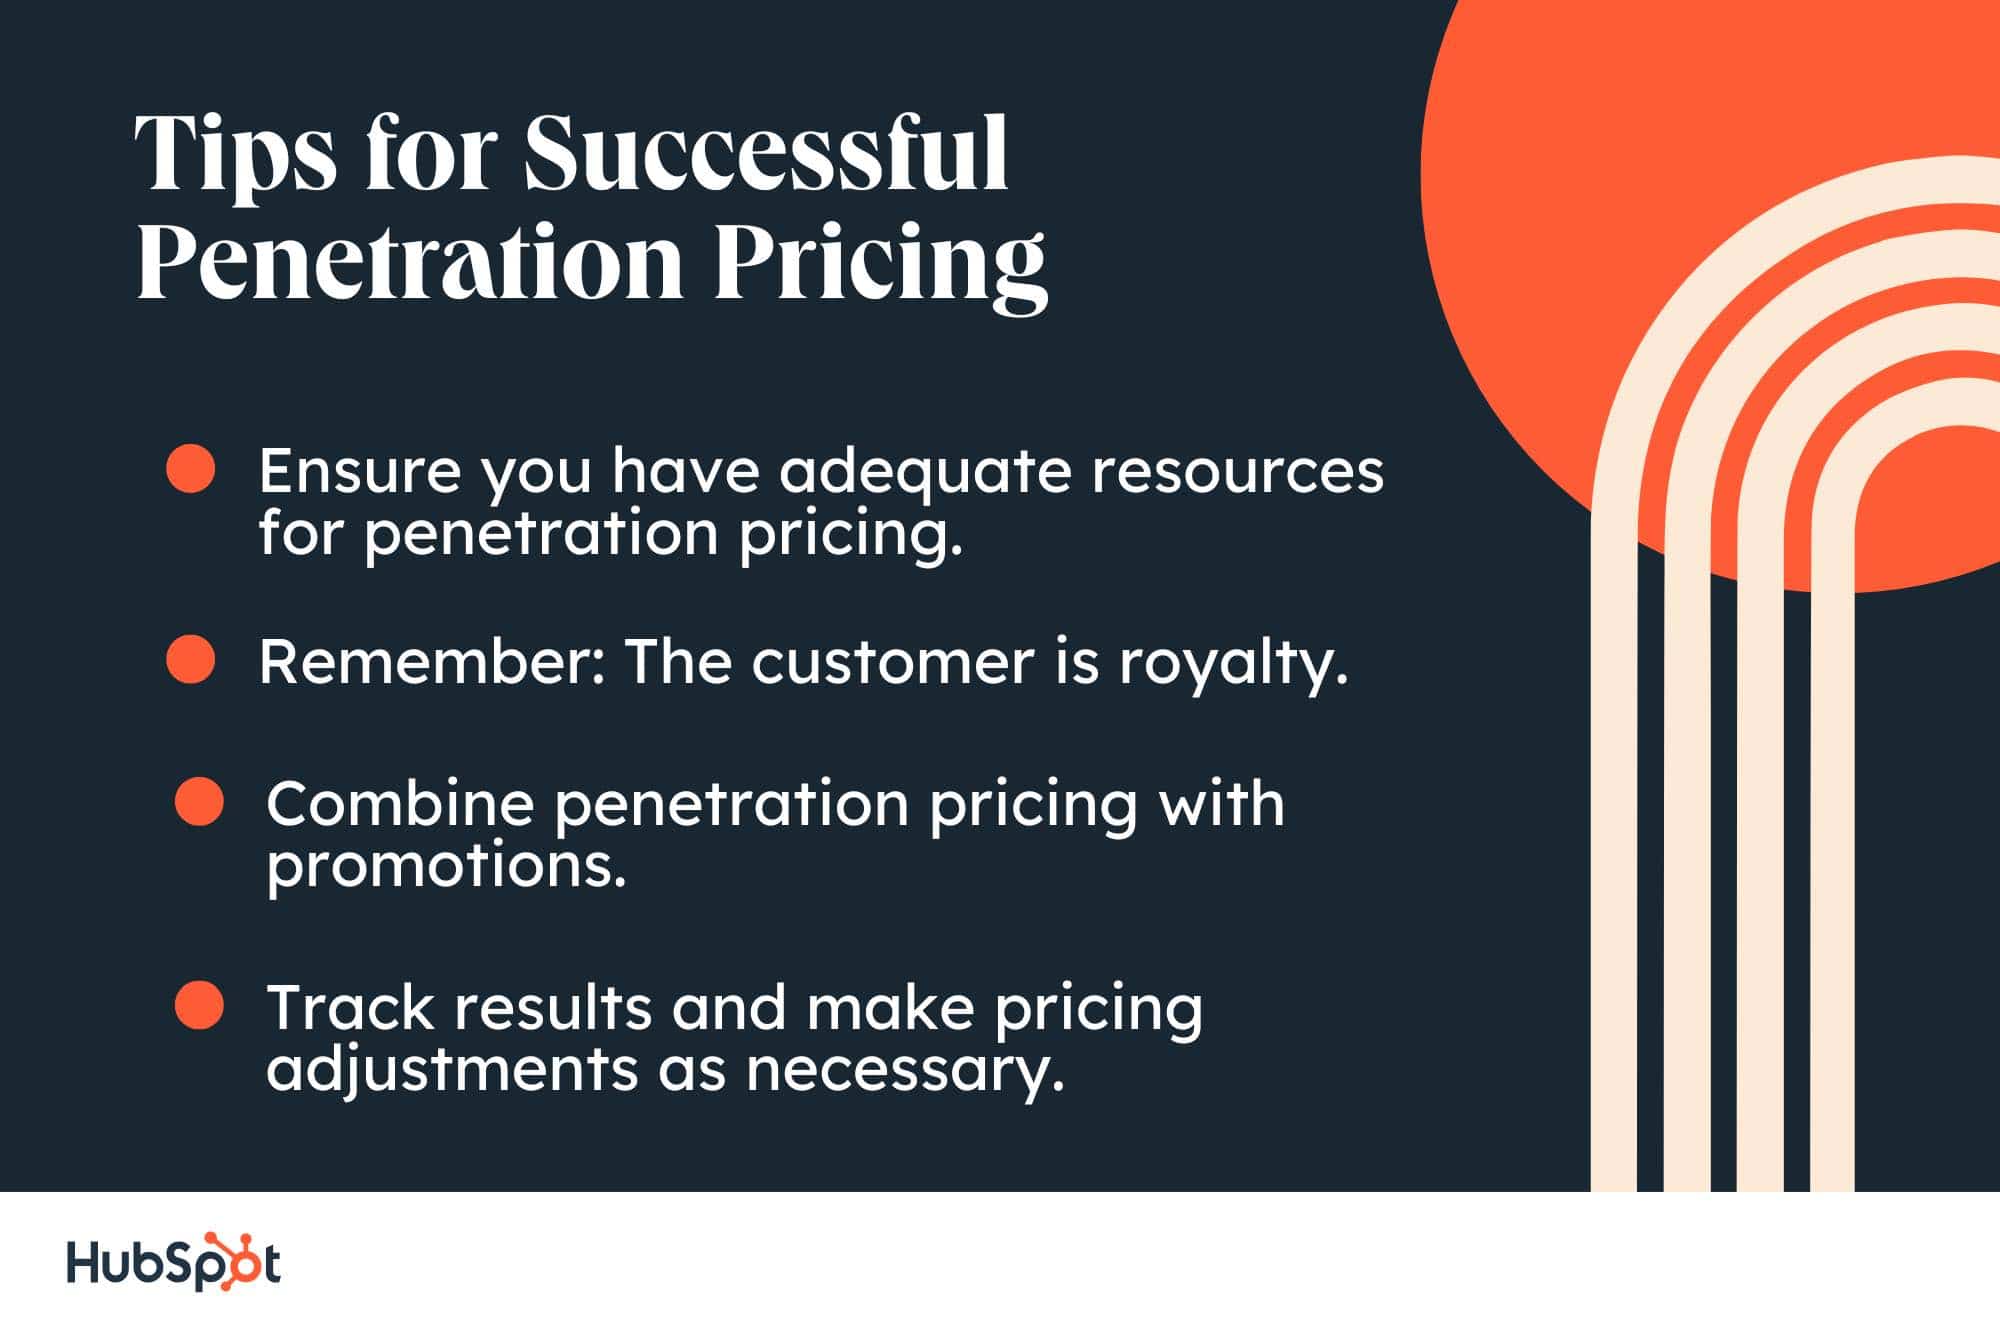 Tips for Successful Penetration Pricing. Ensure you have adequate resources for penetration pricing. Remember: The customer is royalty. Combine penetration pricing with promotions. Track results and make pricing adjustments as necessary.